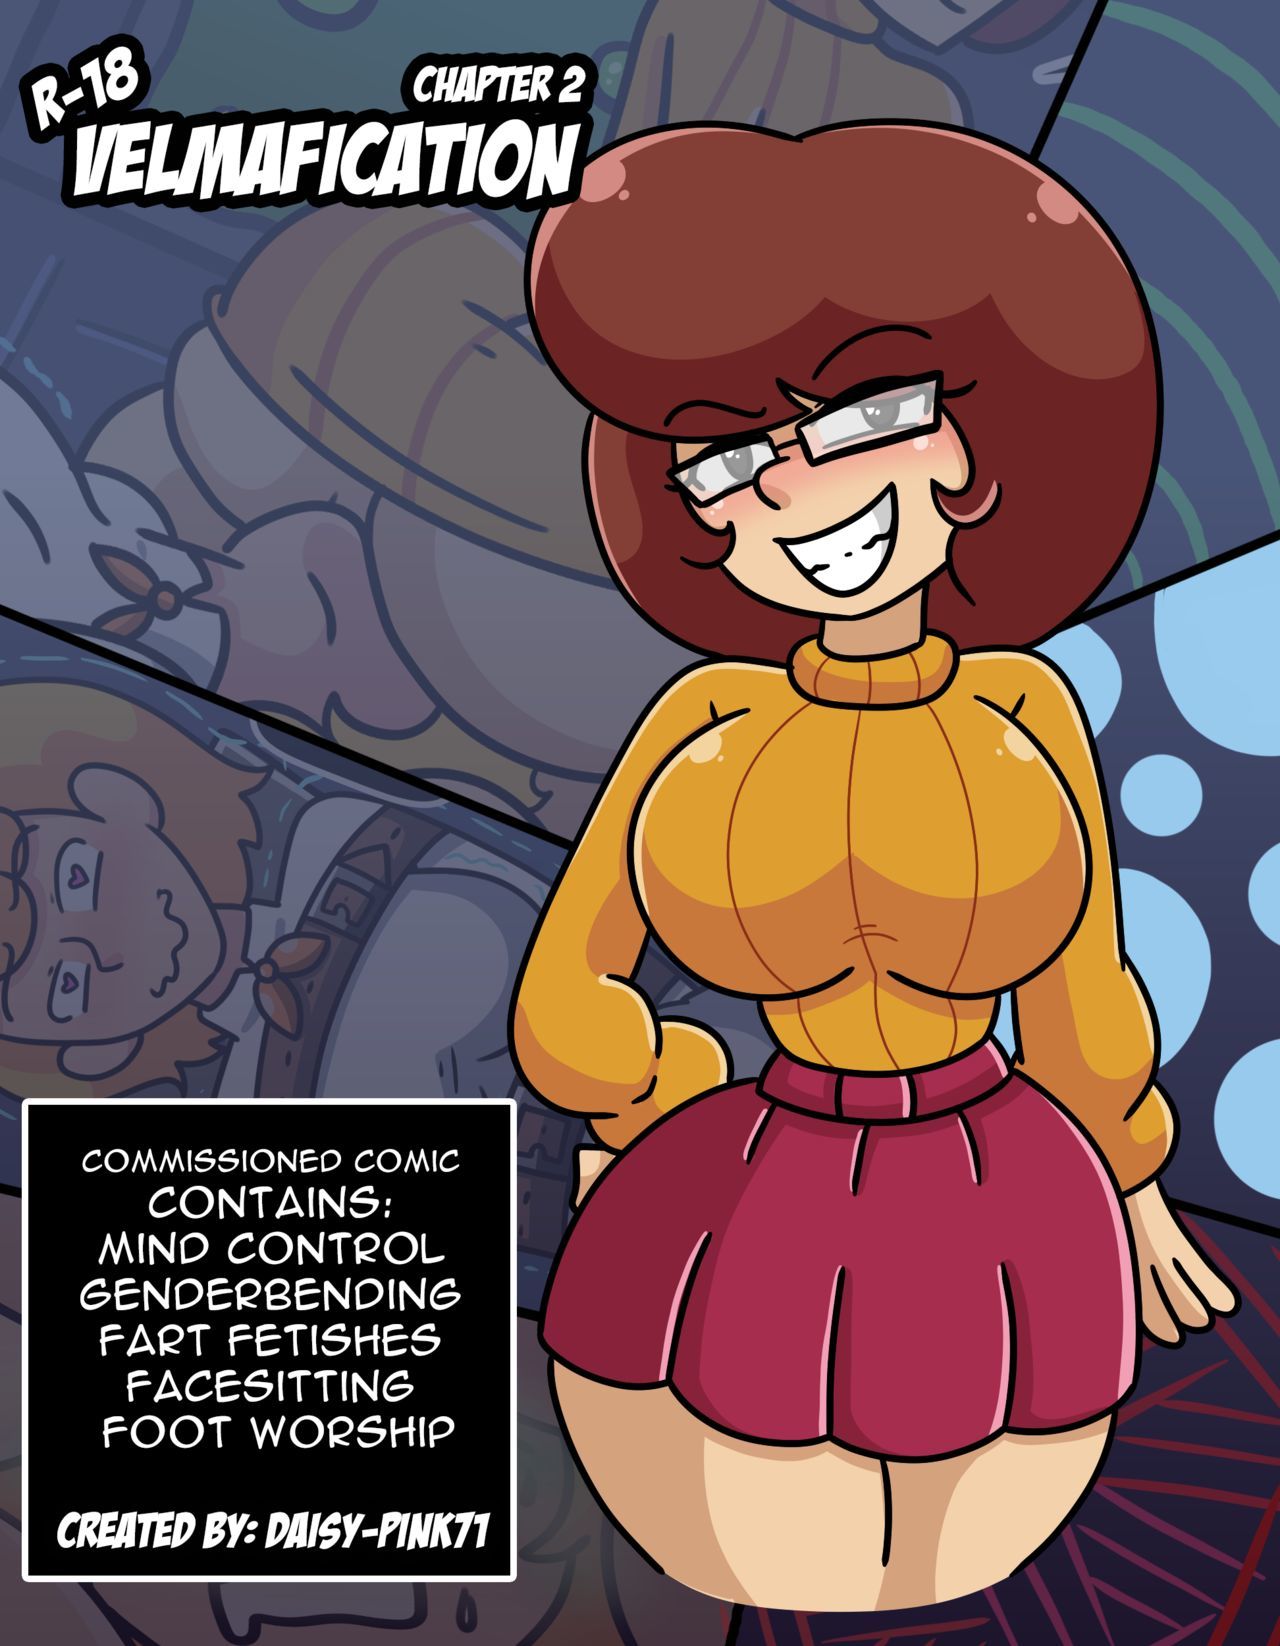 Velmafication Scooby Doo by Daisy-Pink71 page 14